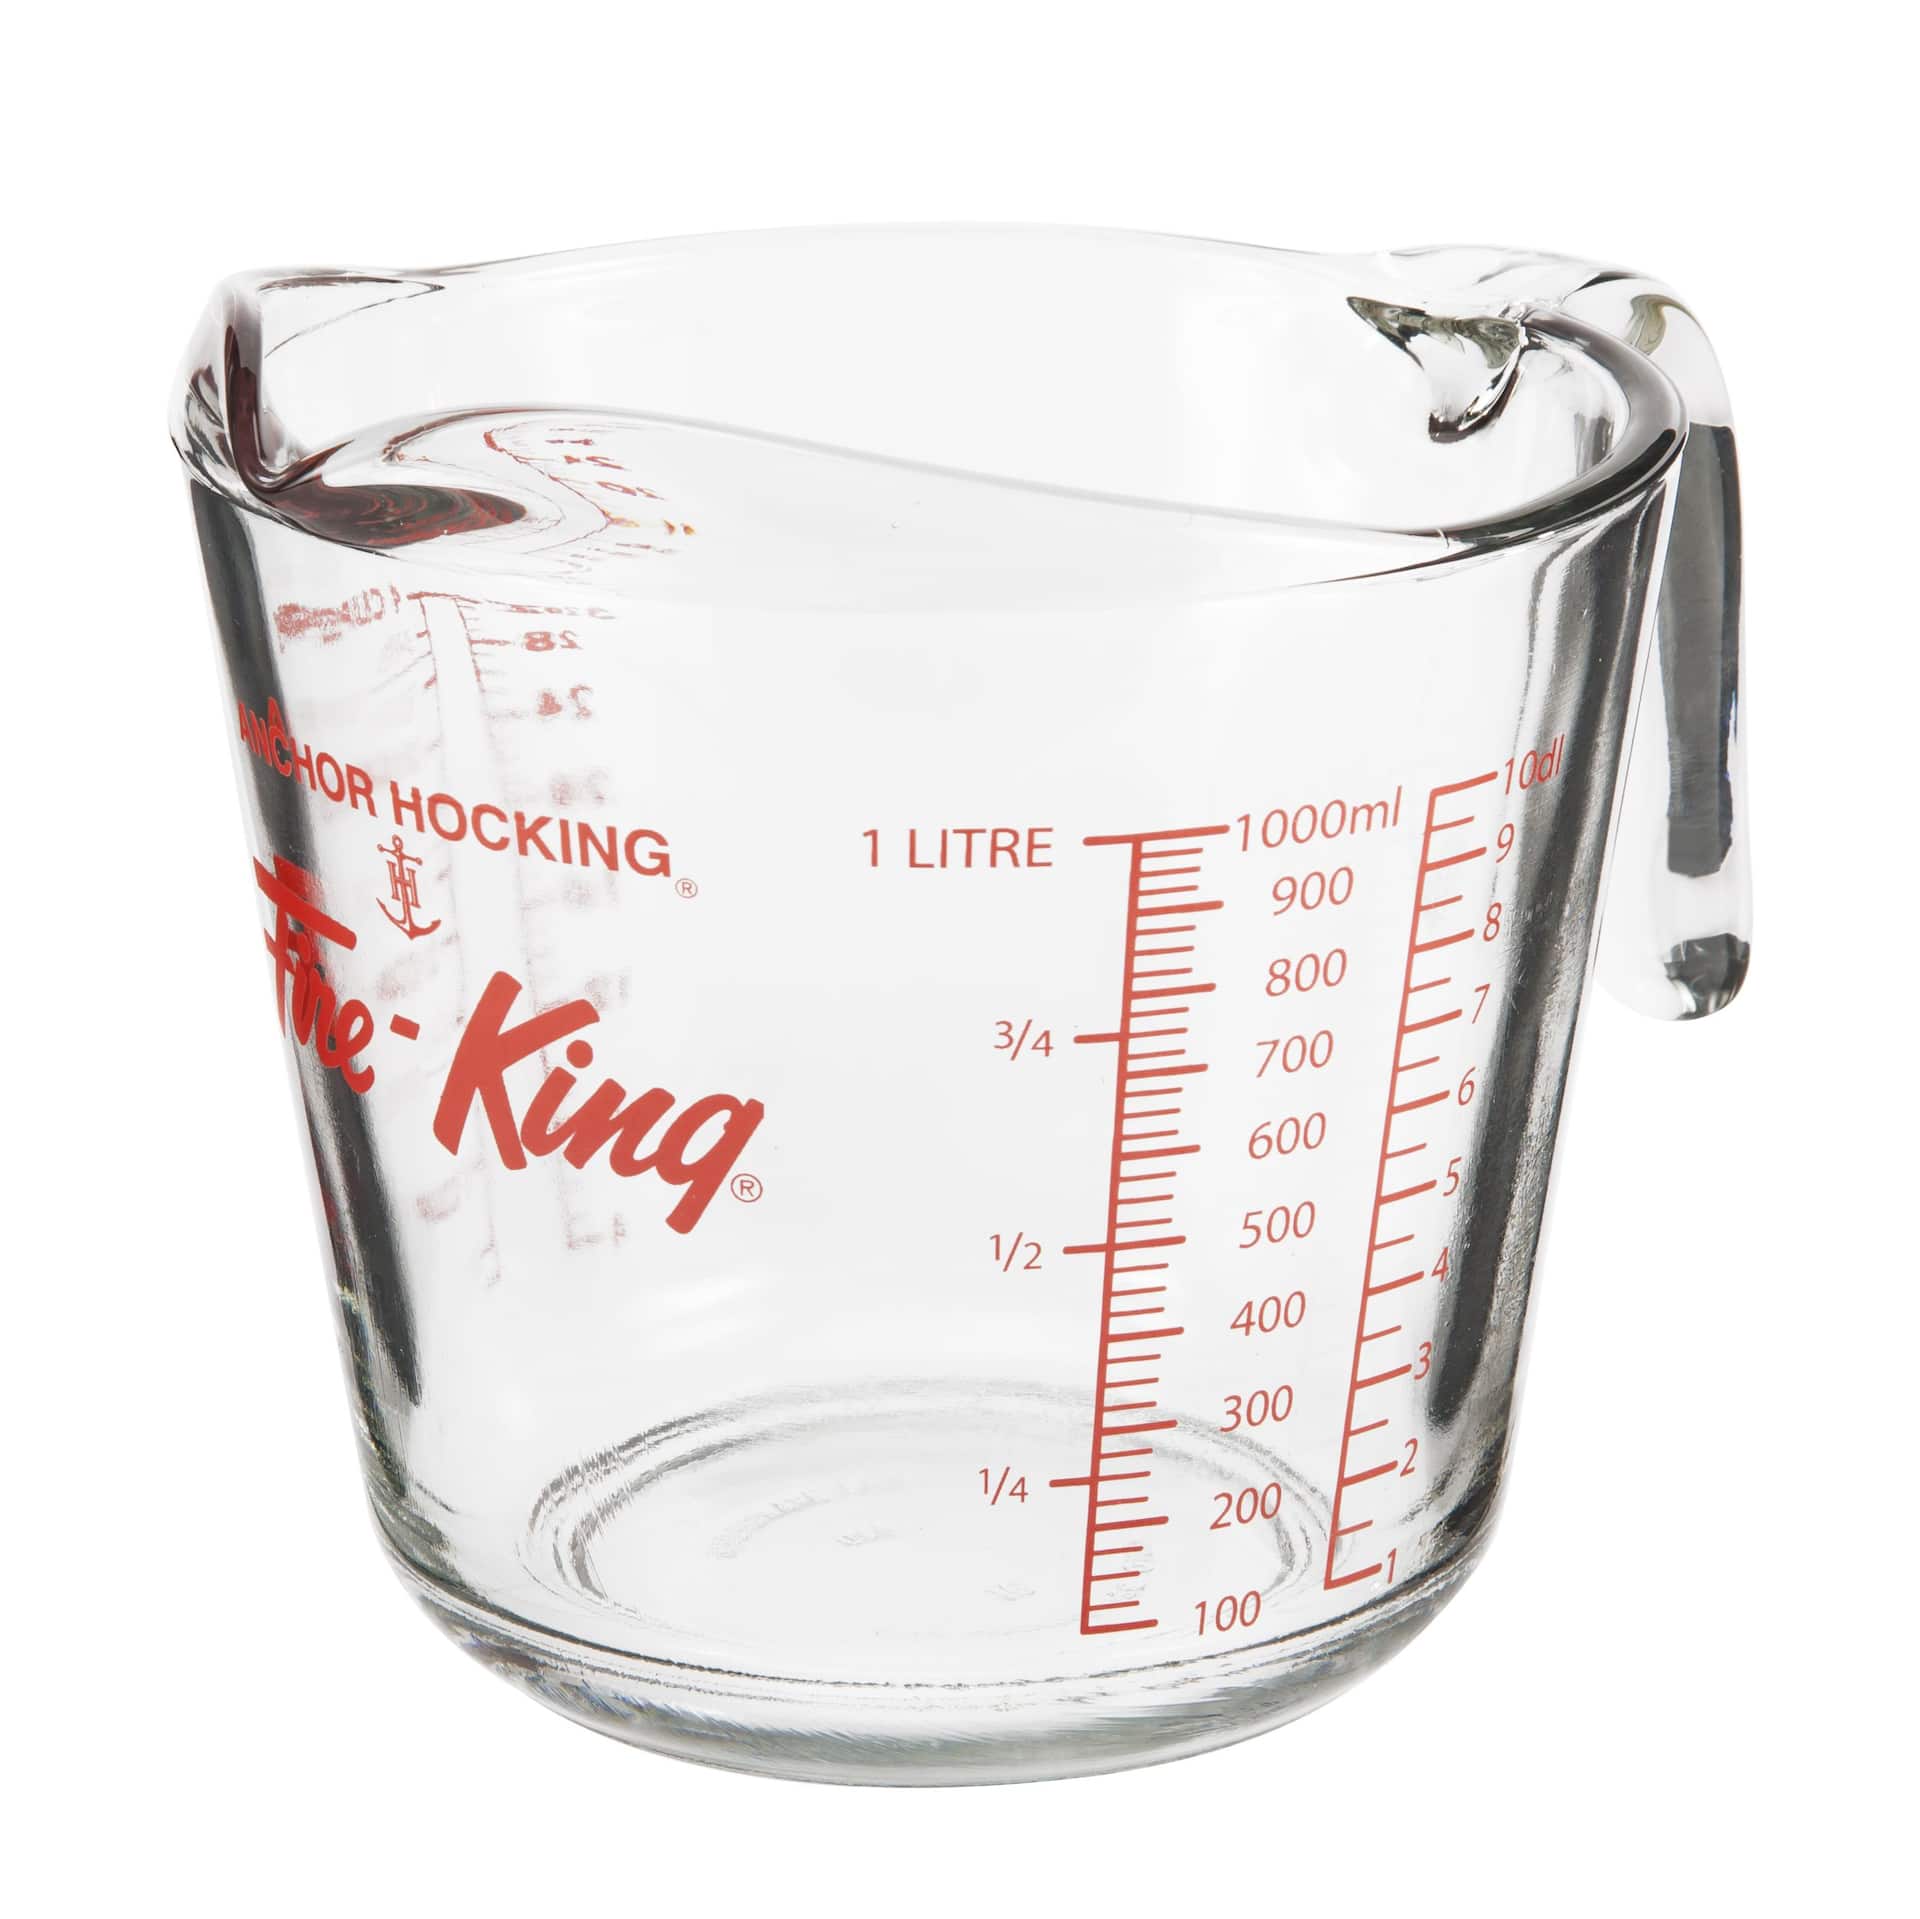 https://media-www.canadiantire.ca/product/living/kitchen/bakeware-baking-prep/0421179/anchor-1l-measuring-cup-7ea377c7-6bf3-4c44-b55b-edfff7b7ad48-jpgrendition.jpg